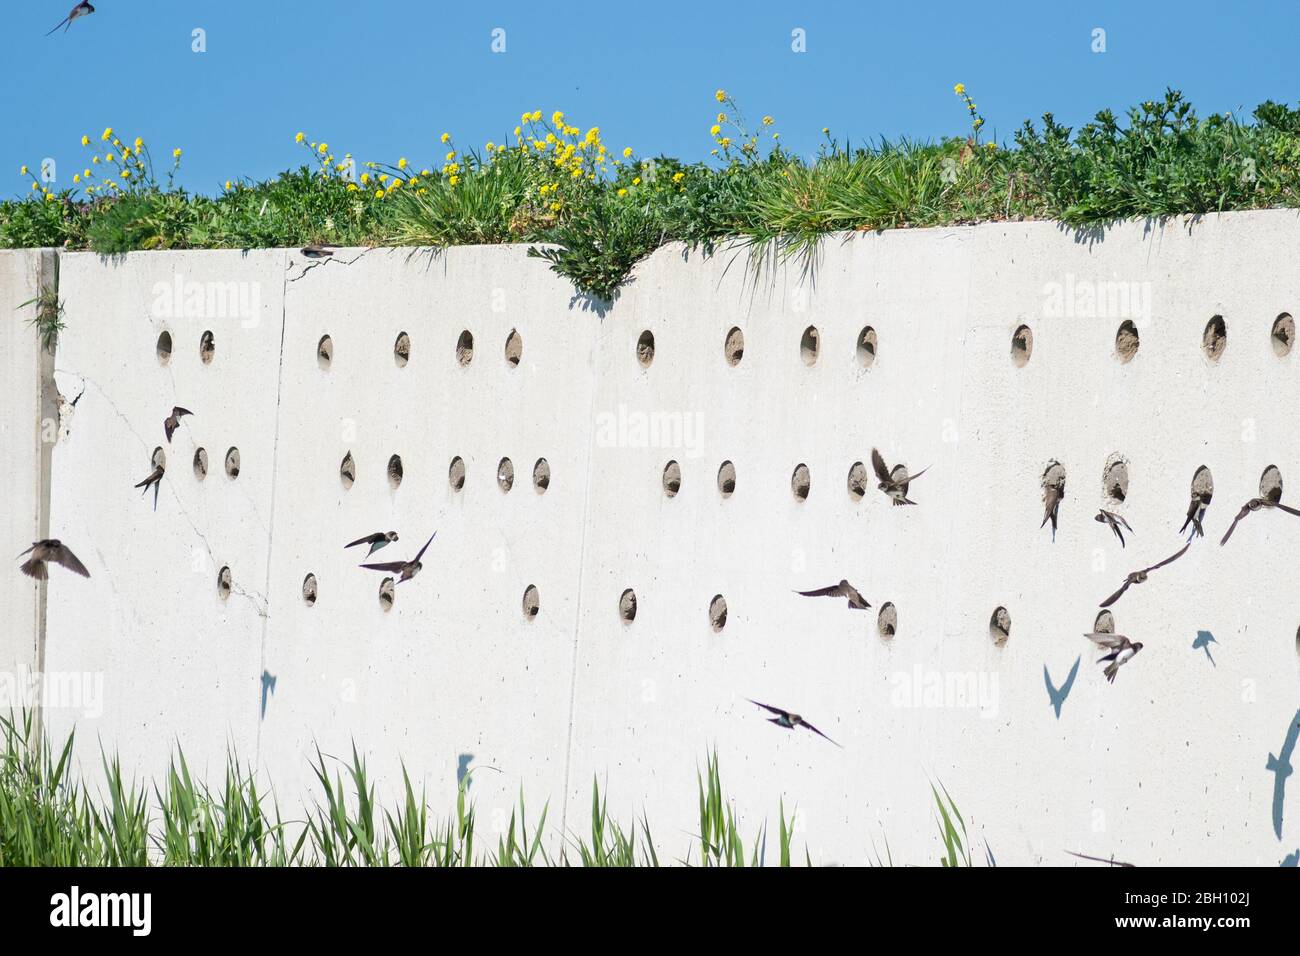 Artificial wall with holes for barn swallow nests. Barn swallows are swirling around the place. Stock Photo